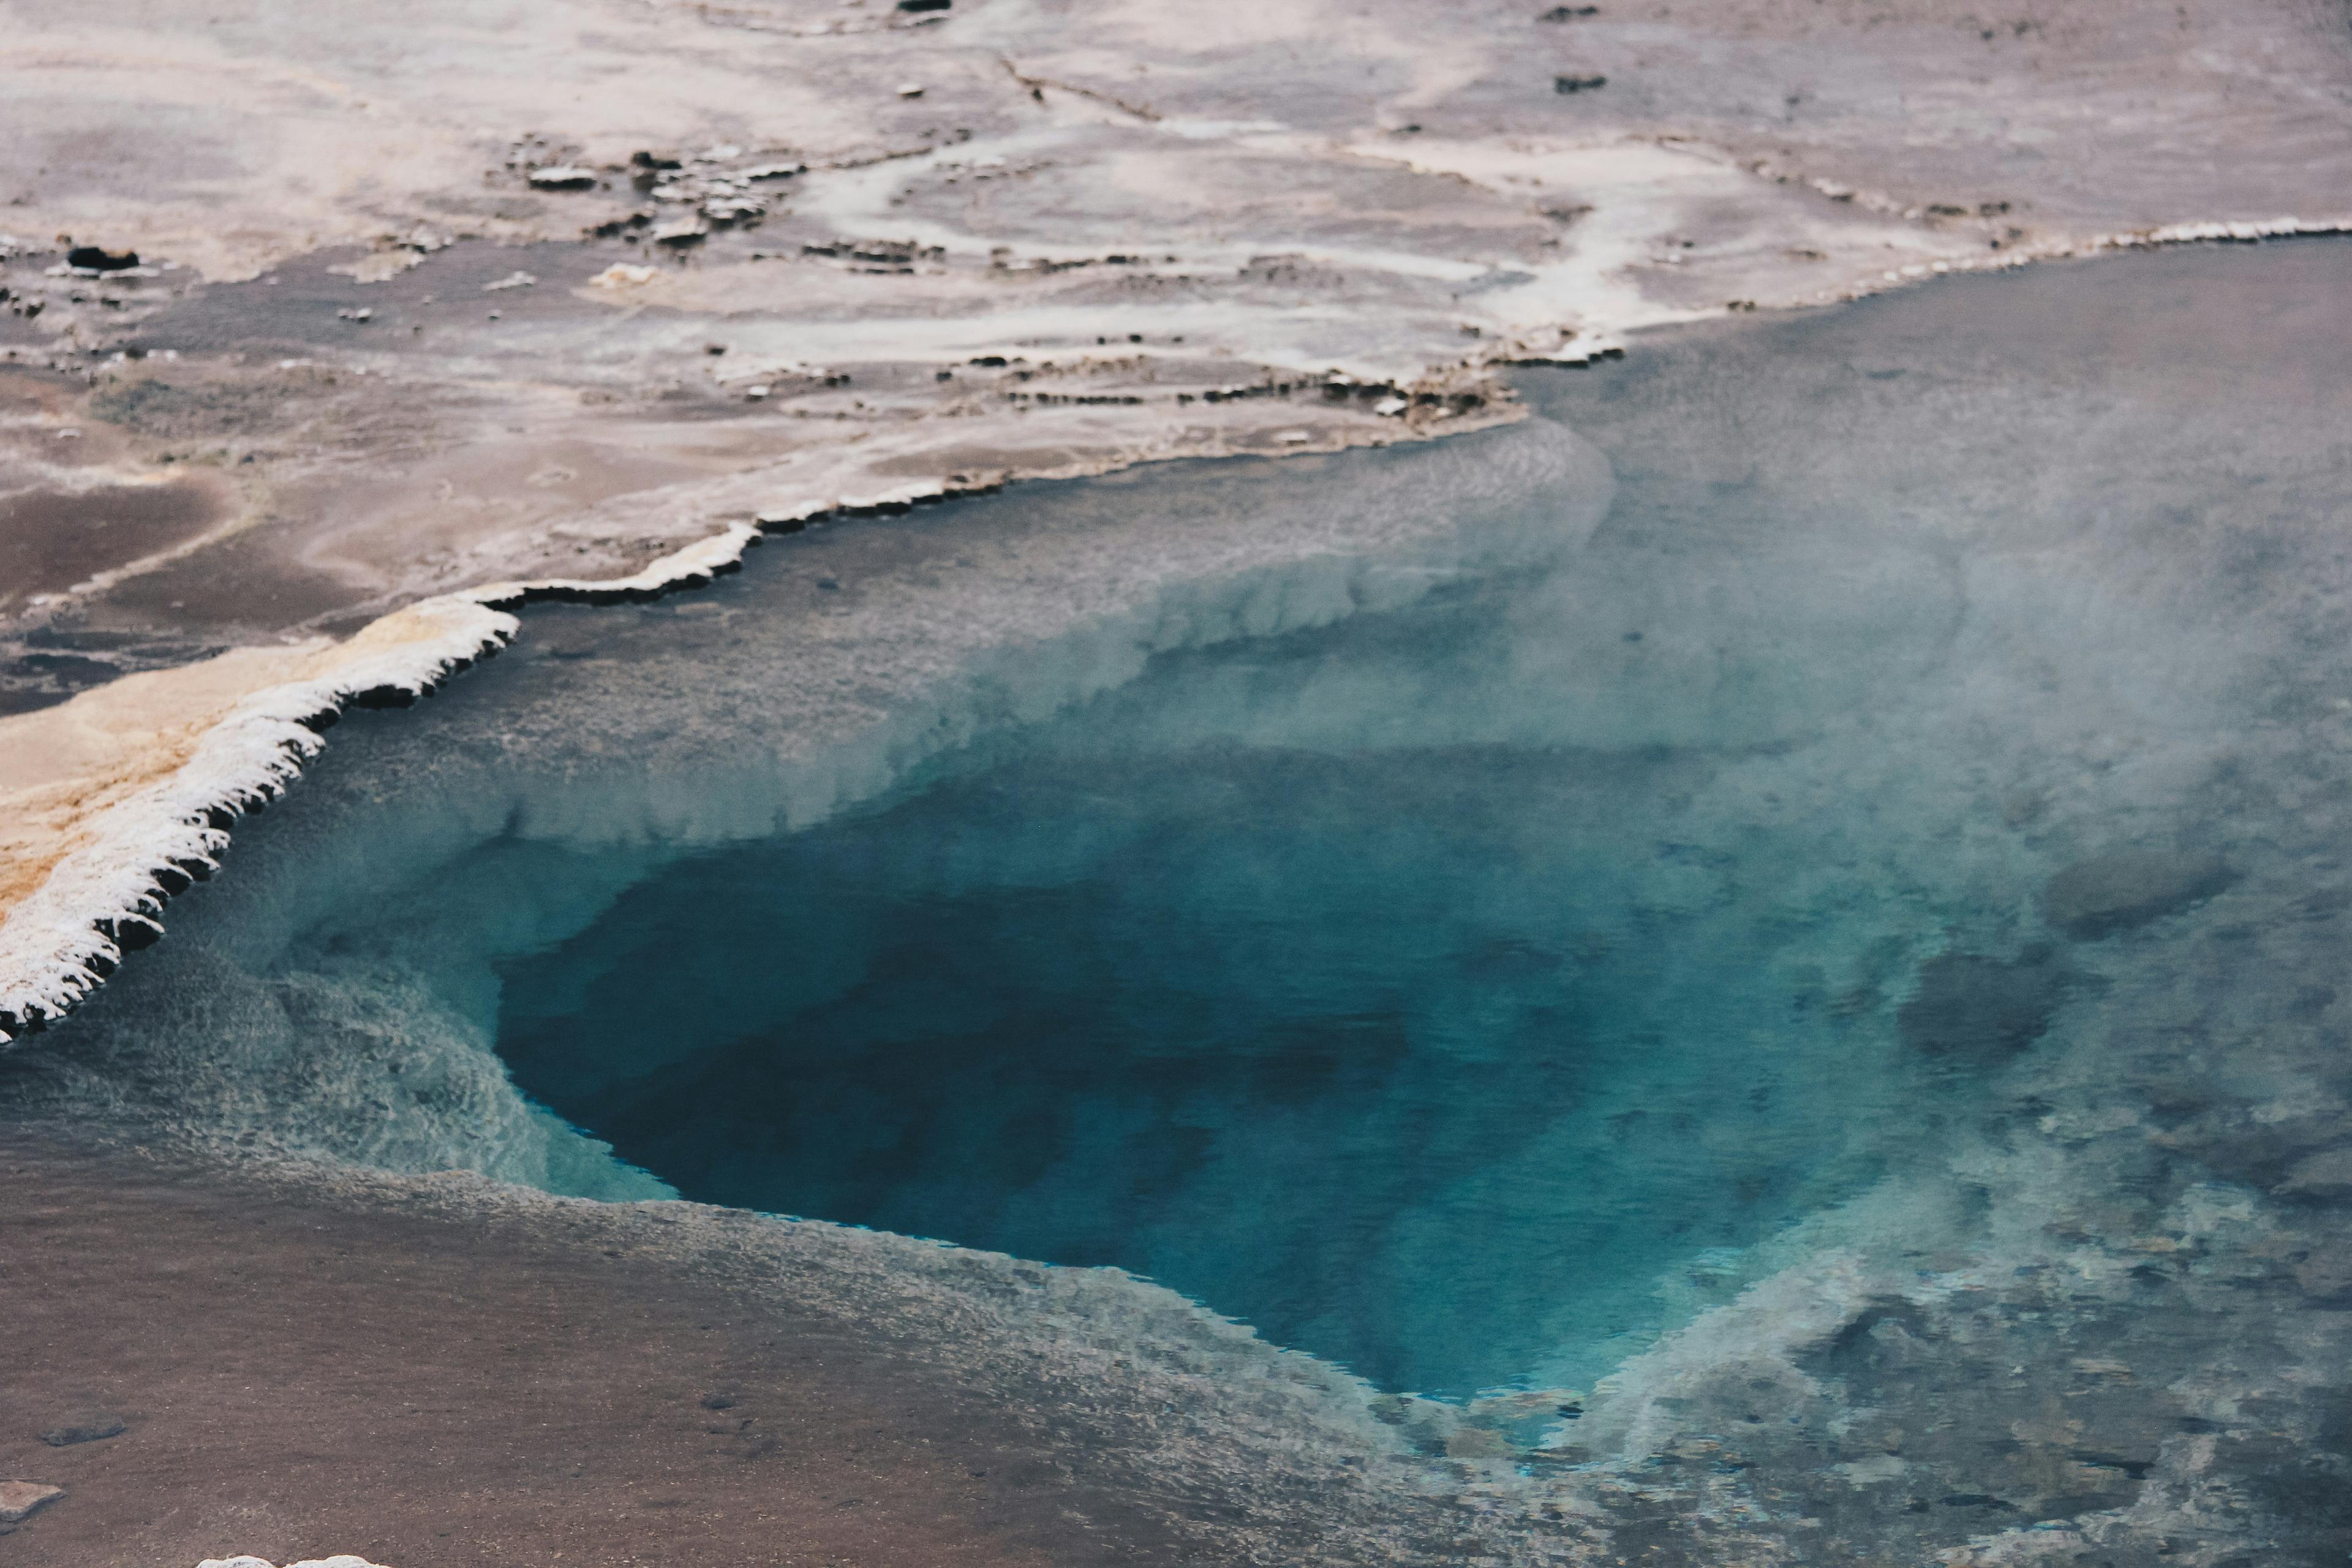 Close-up of a geothermal hot spring in Iceland, with steam rising from the vivid blue water and contrasting with the earthy tones of the surrounding mineral-rich terrain.